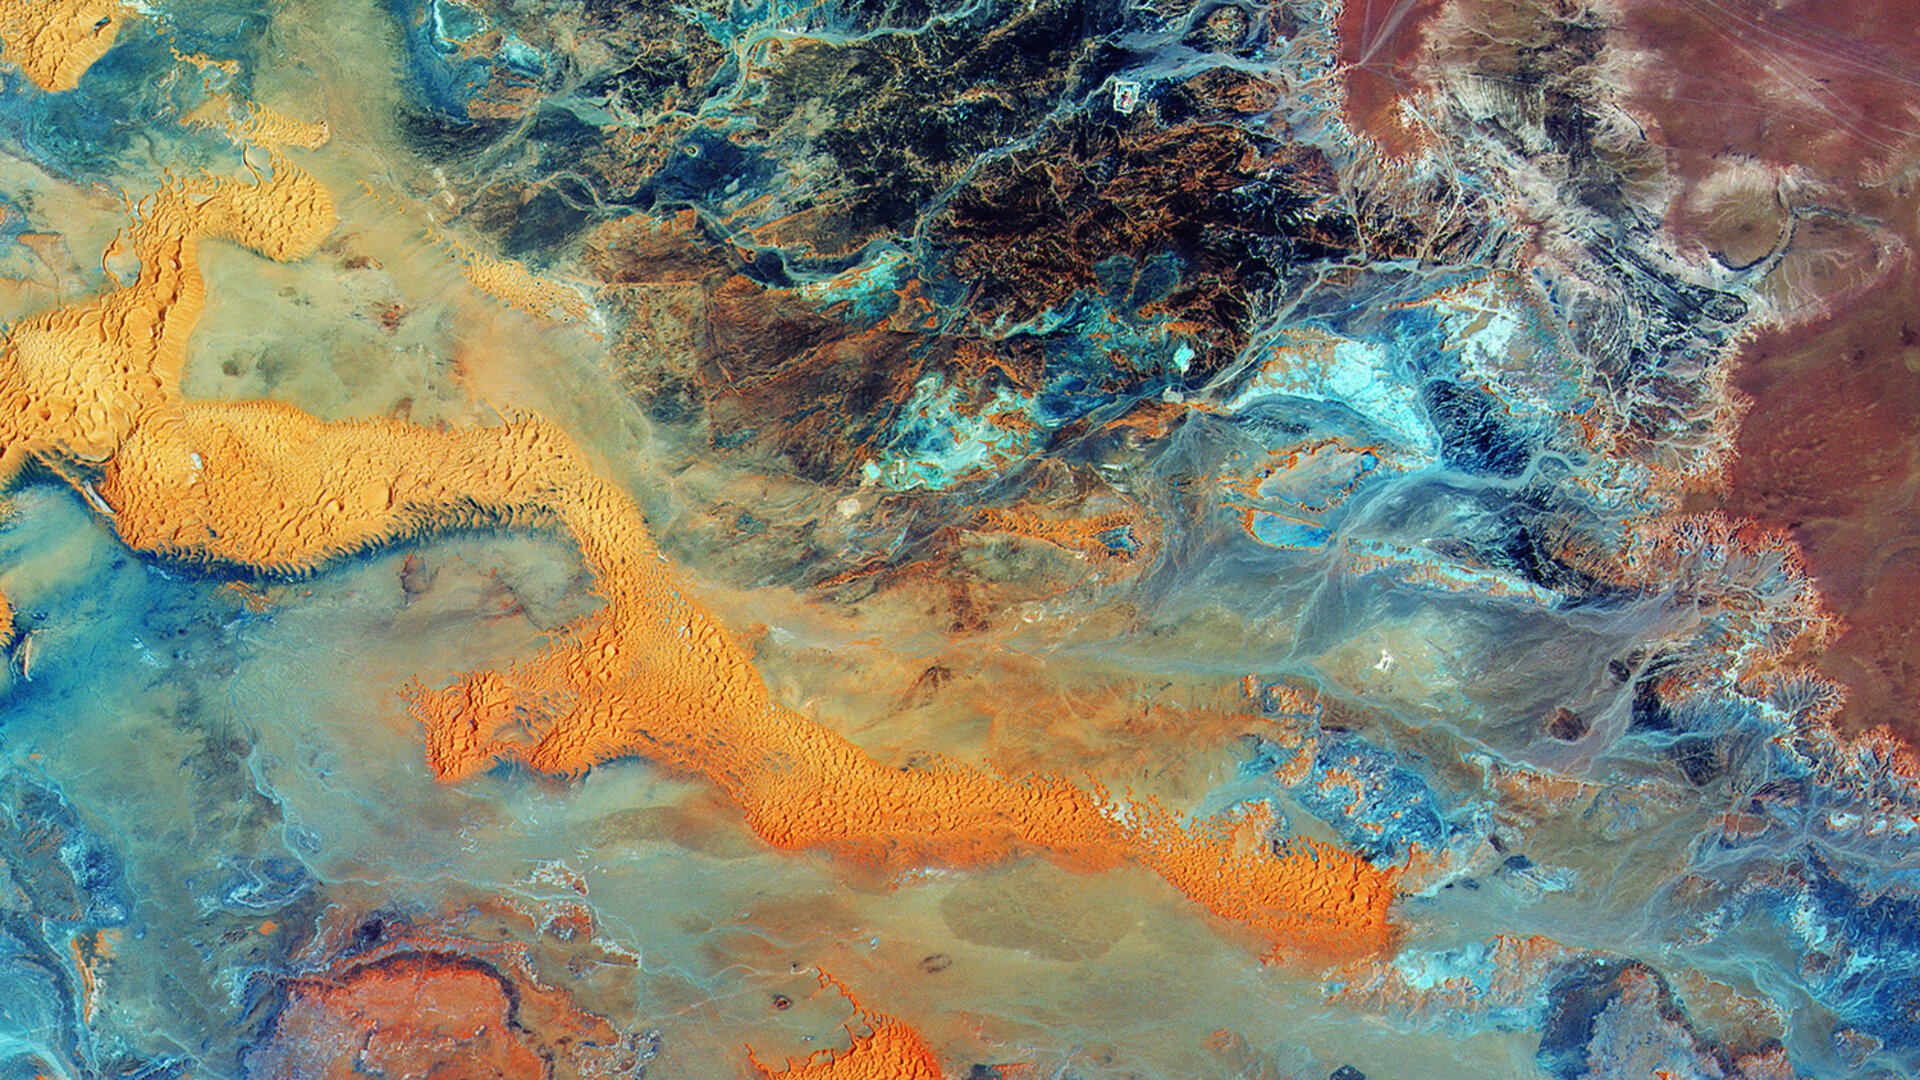 Colours and structures in Libya's desert imaged by the Copernicus Sentinel-2A satellite